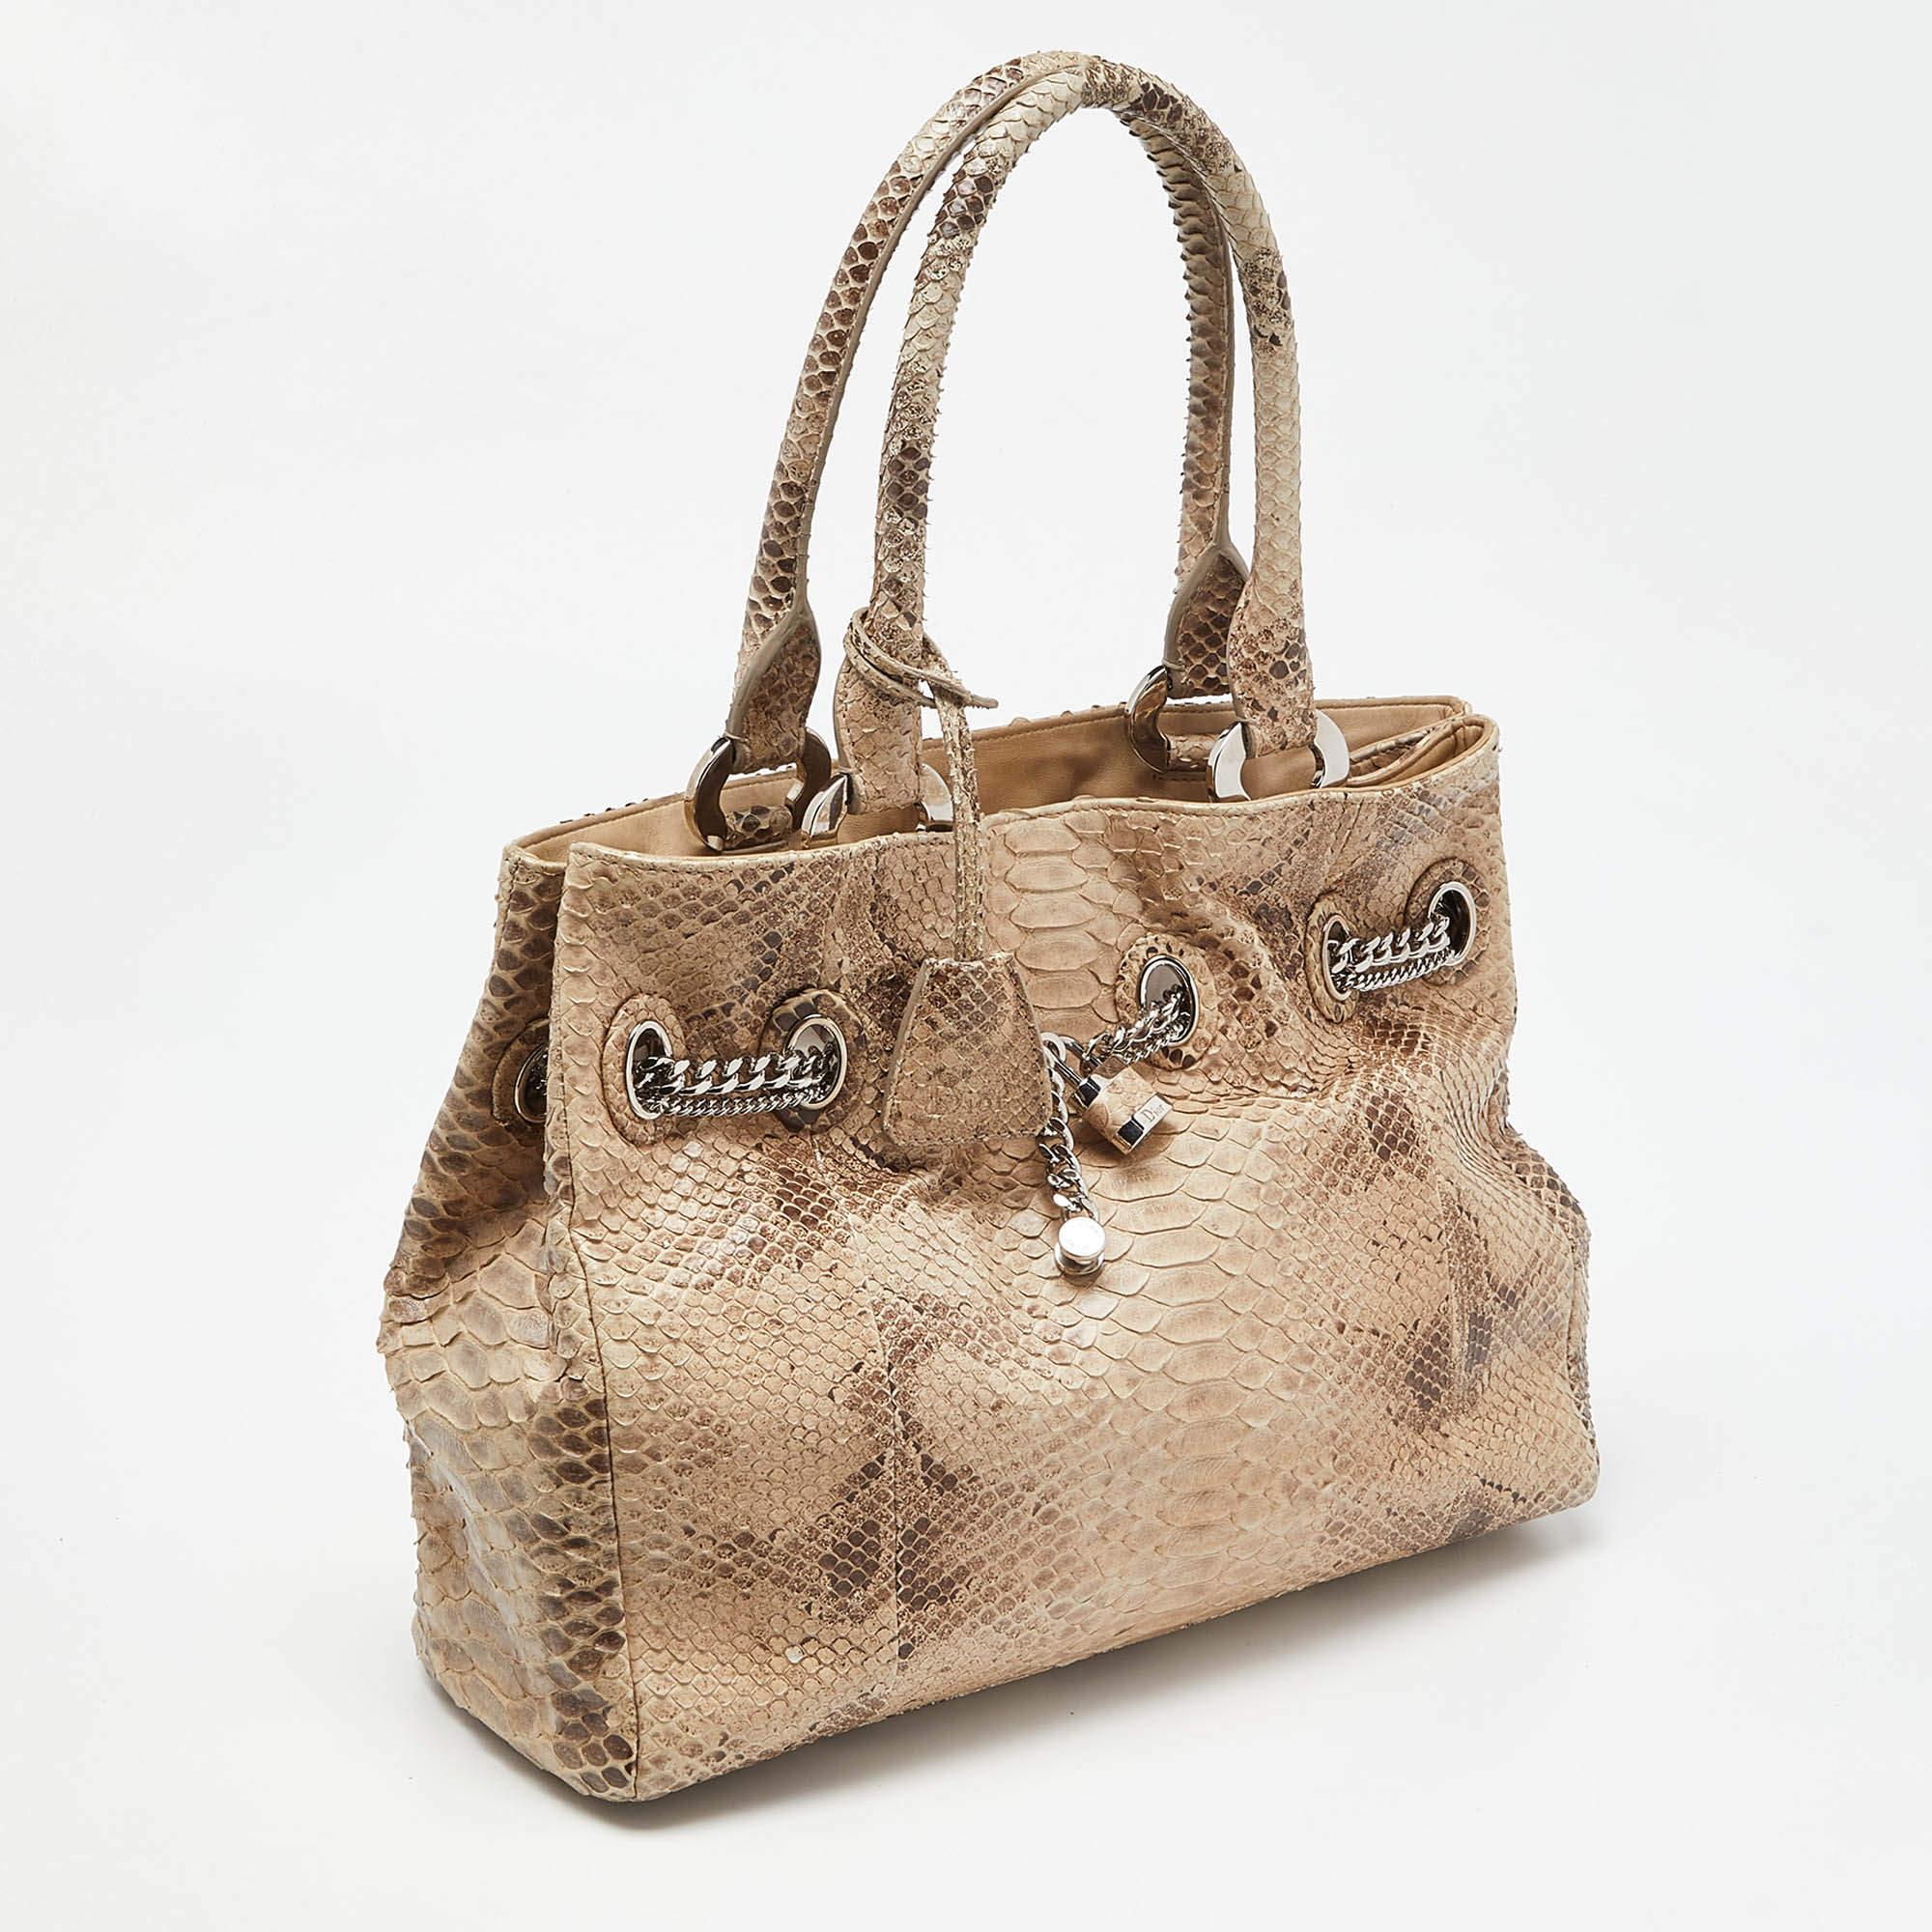 A lovely Christian Dior tote that has been crafted from leather and covered in the brand's signature Cannage quilt. It has two handles and a gold-tone chain drawstring that ends with a padlock on the front. The fabric interior is spacious and sized